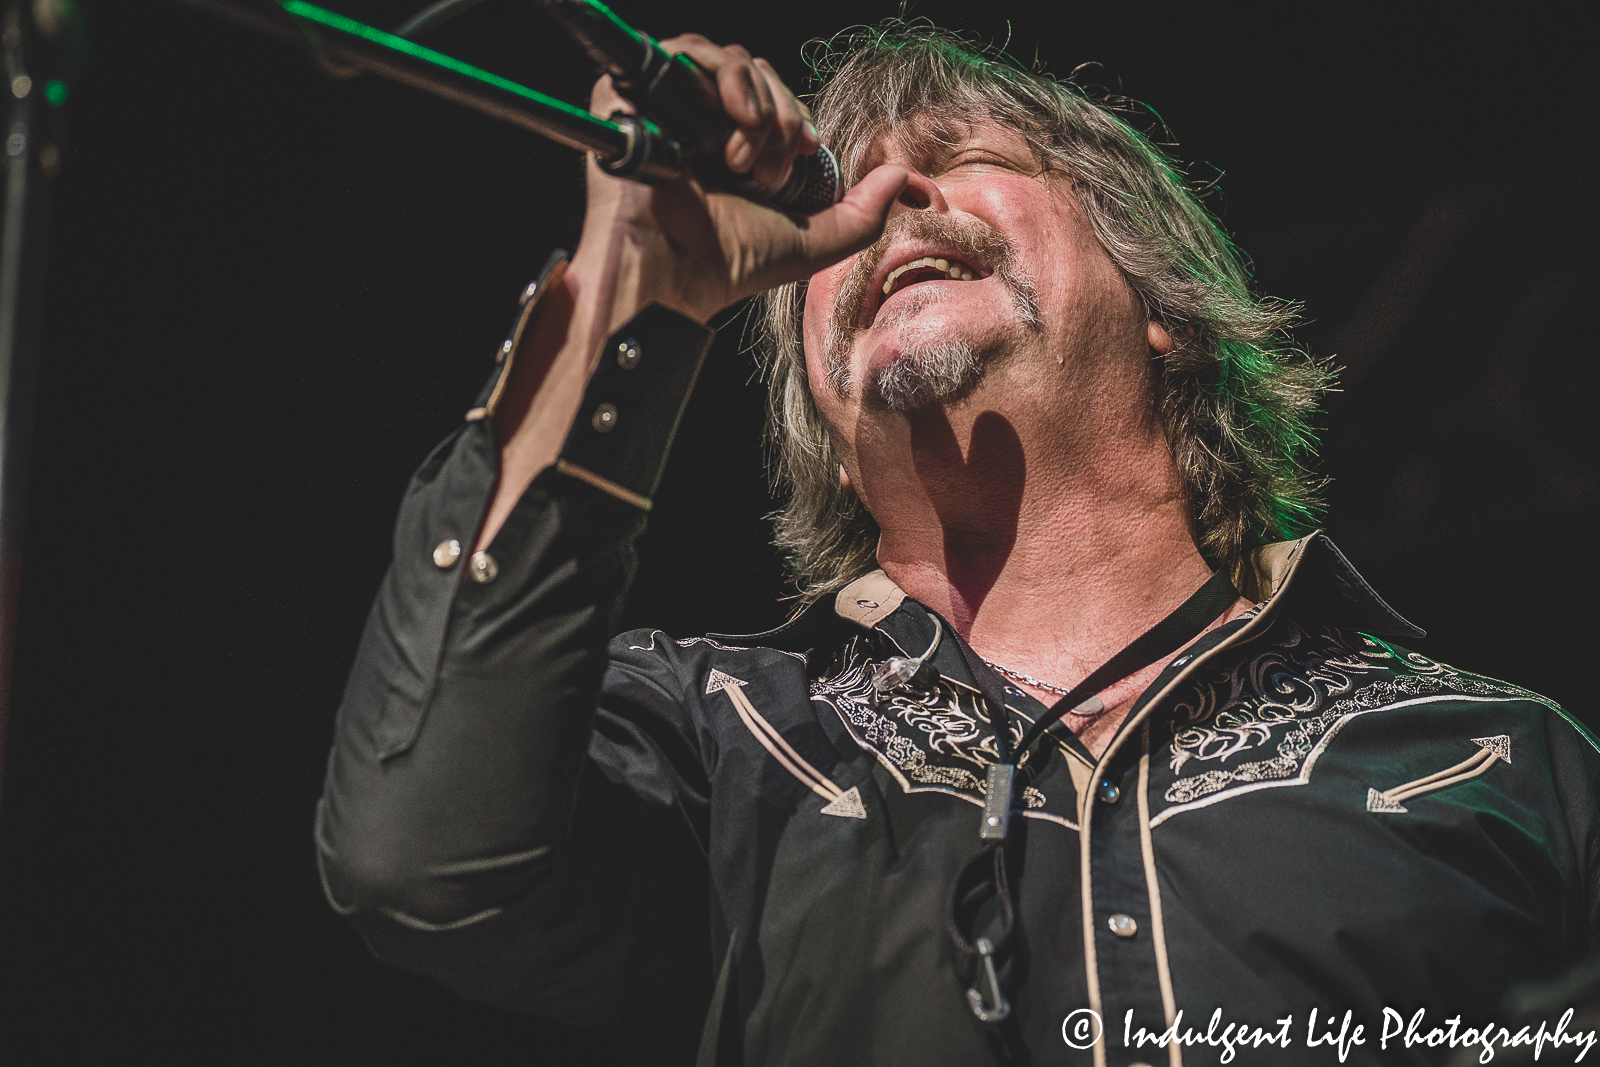 The Marshall Tucker Band member Marcus James Henderson performing live at Ameristar Casino's Star Pavilion in Kansas City, MO on October 28, 2022.